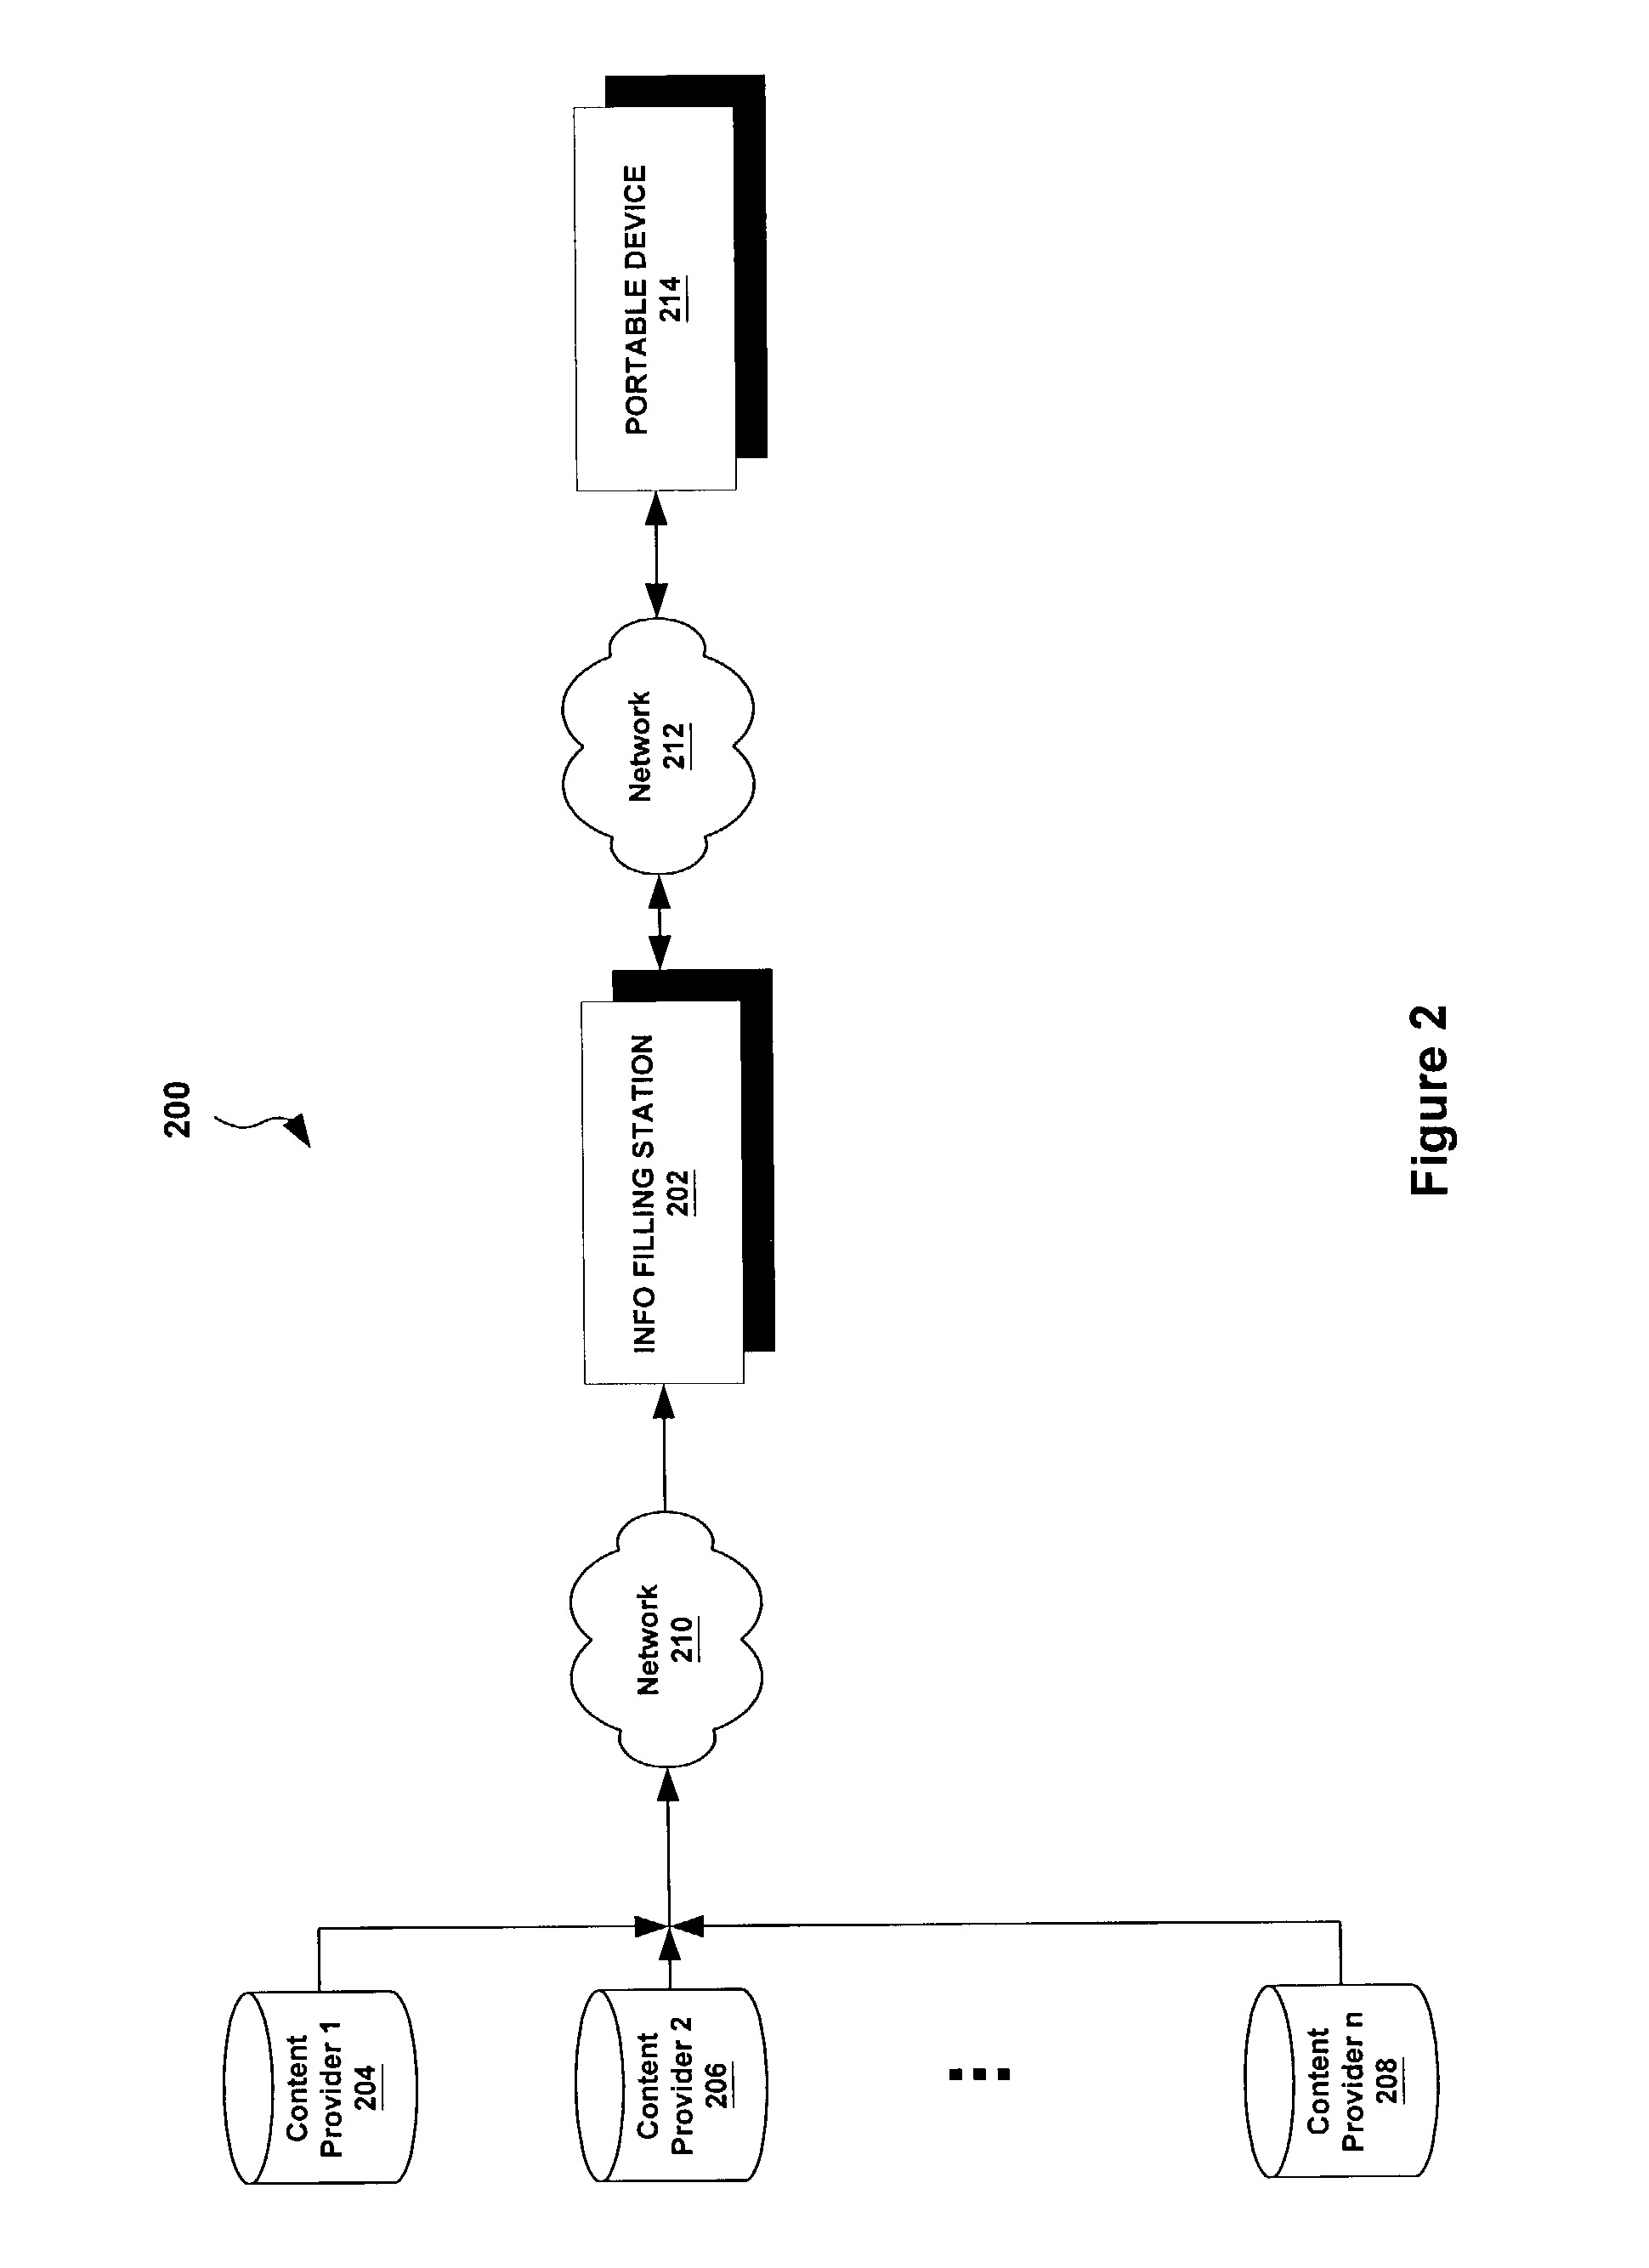 System and method for wirelessly transacting access to a set of events and associated digital content/products